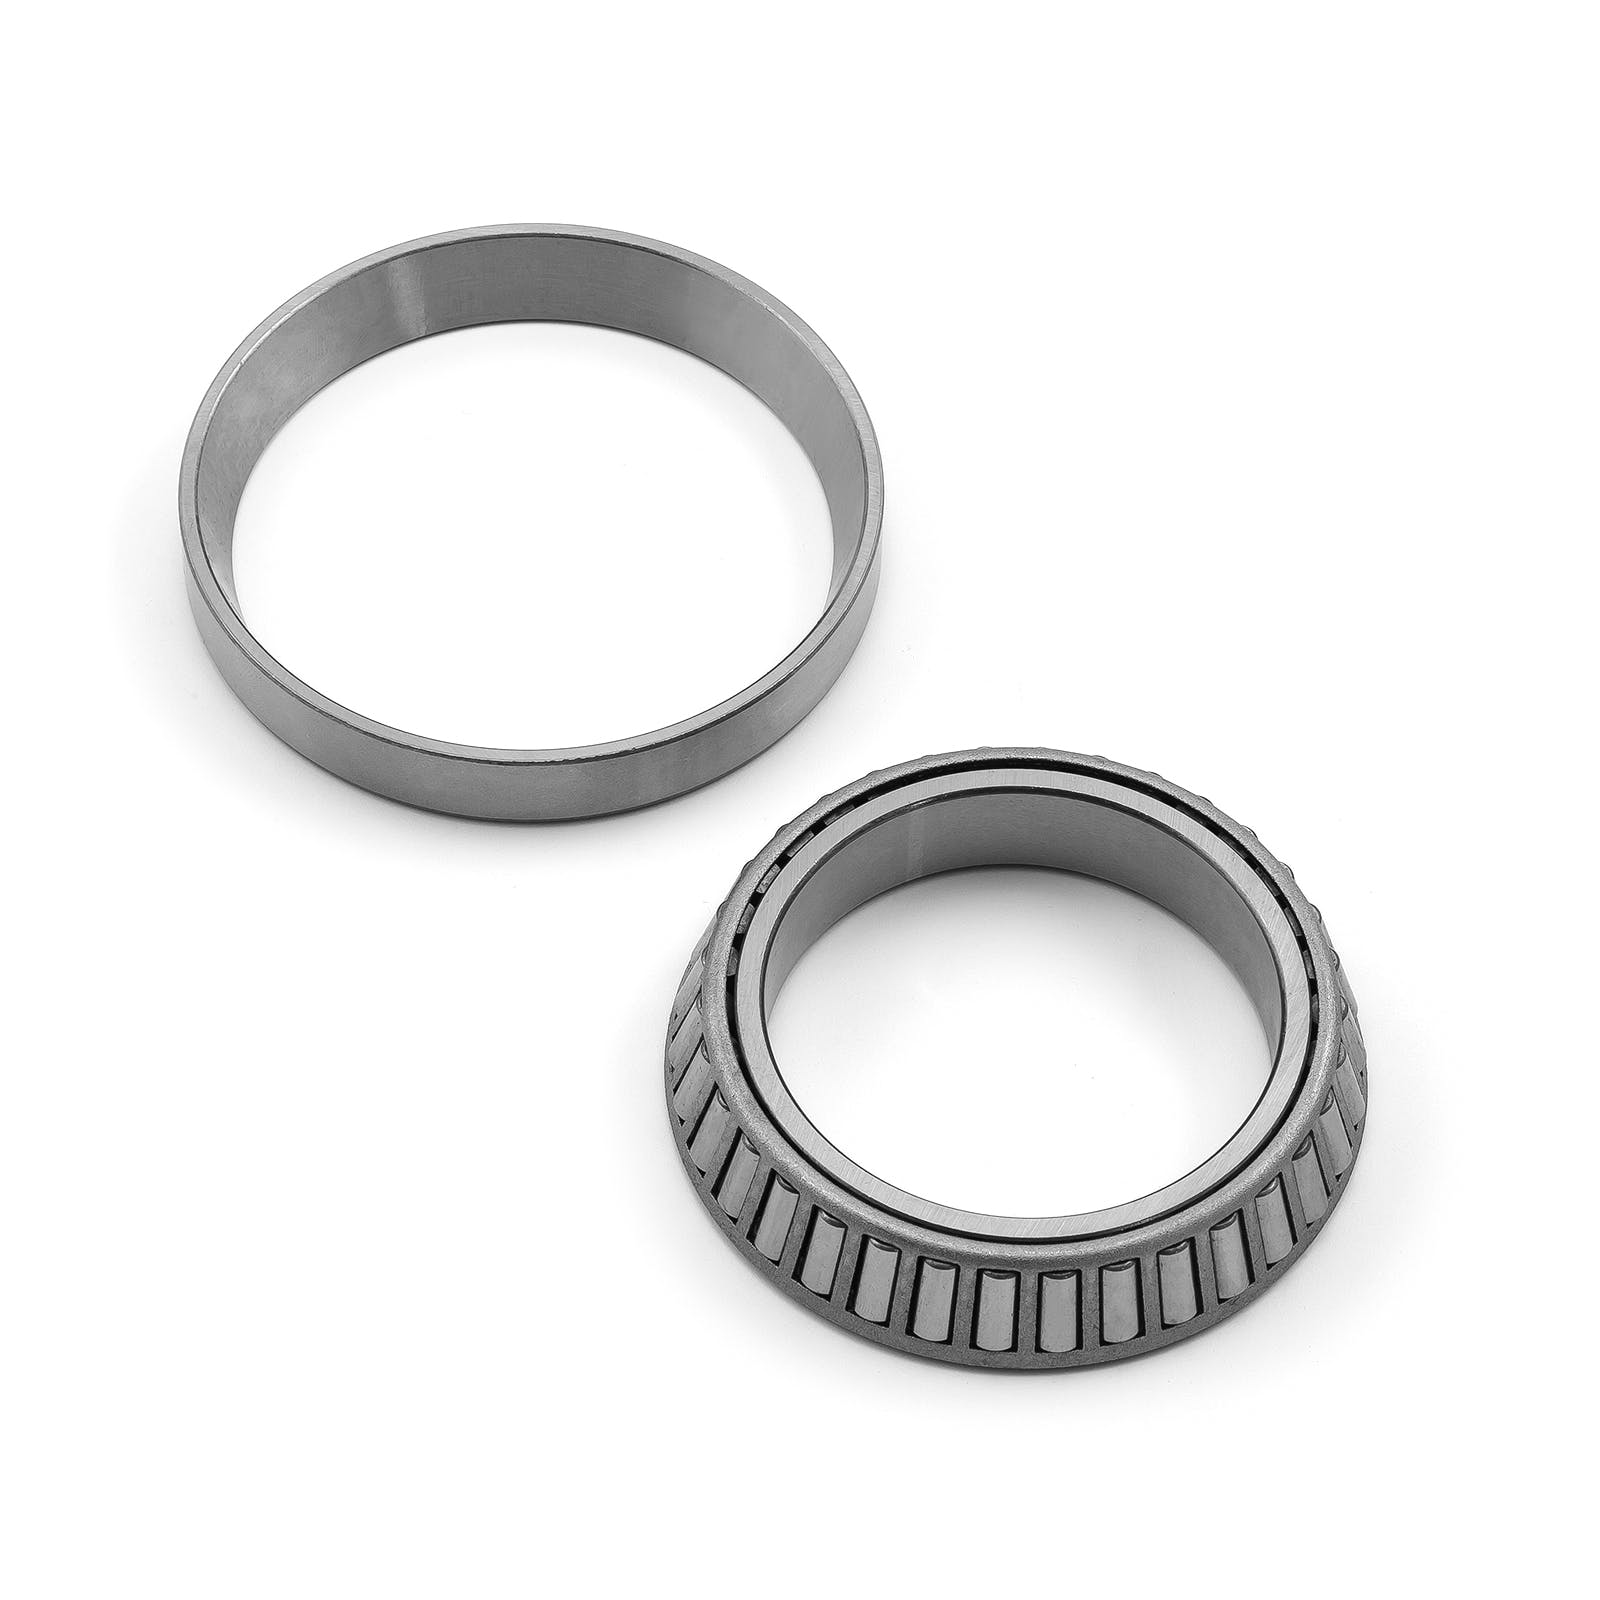 Speedmaster PCE203.1006 9 Carrier Bearing w/ 2.75 Journal  to suit 4.00 Case